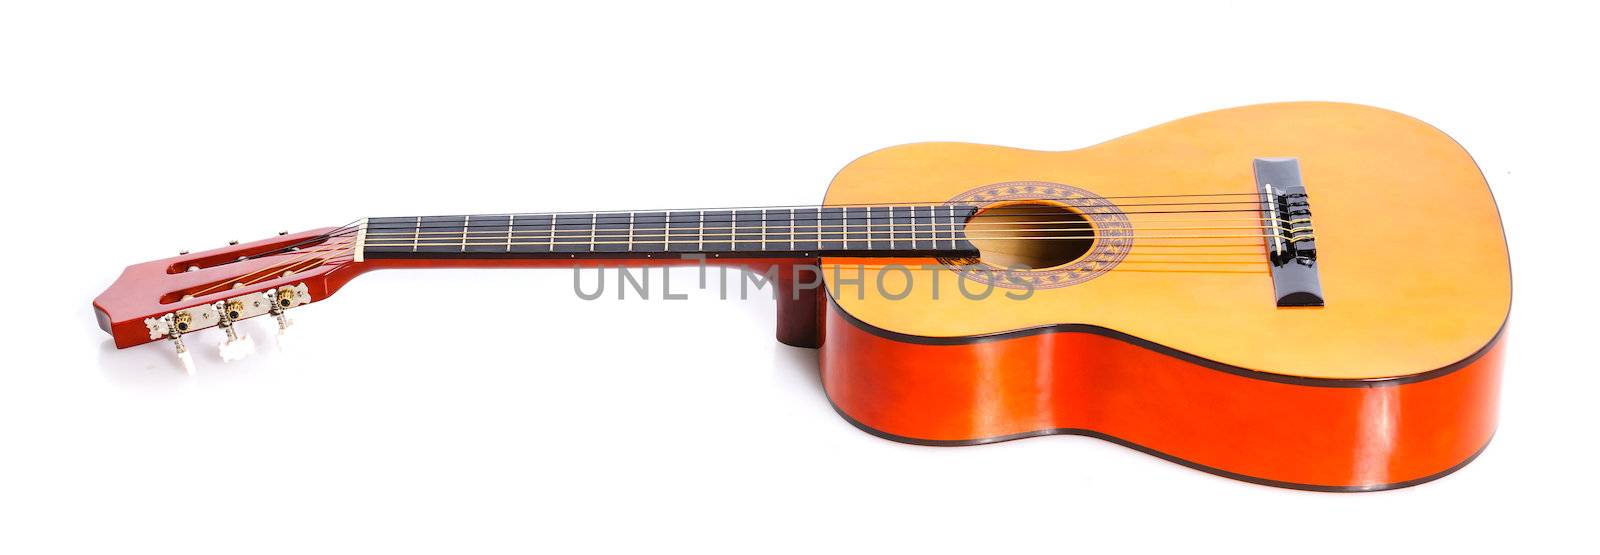 Classical Spanish guitar. Isolated on white background